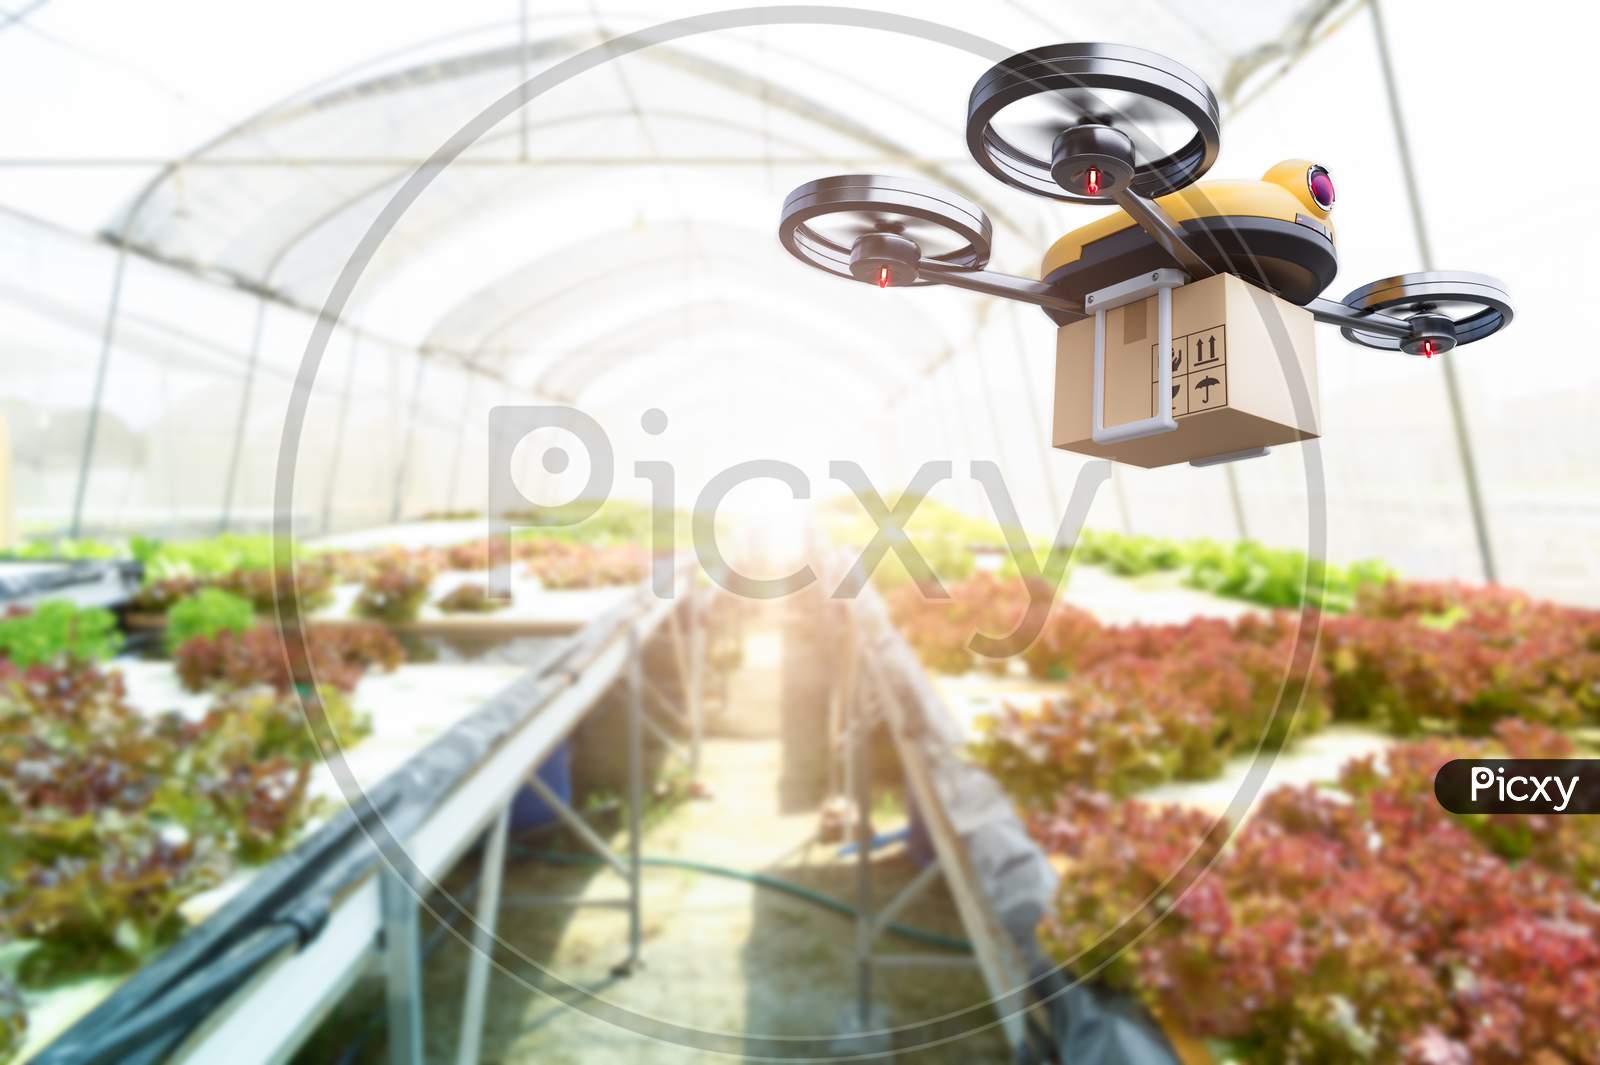 Hydroponics Vegetables Farming Drone At Indoors Modern Farm Background. Service For Delivery Shipping Healthy Organic Product And Goods To Customer. Business And Farming Innovative Technology Gadget